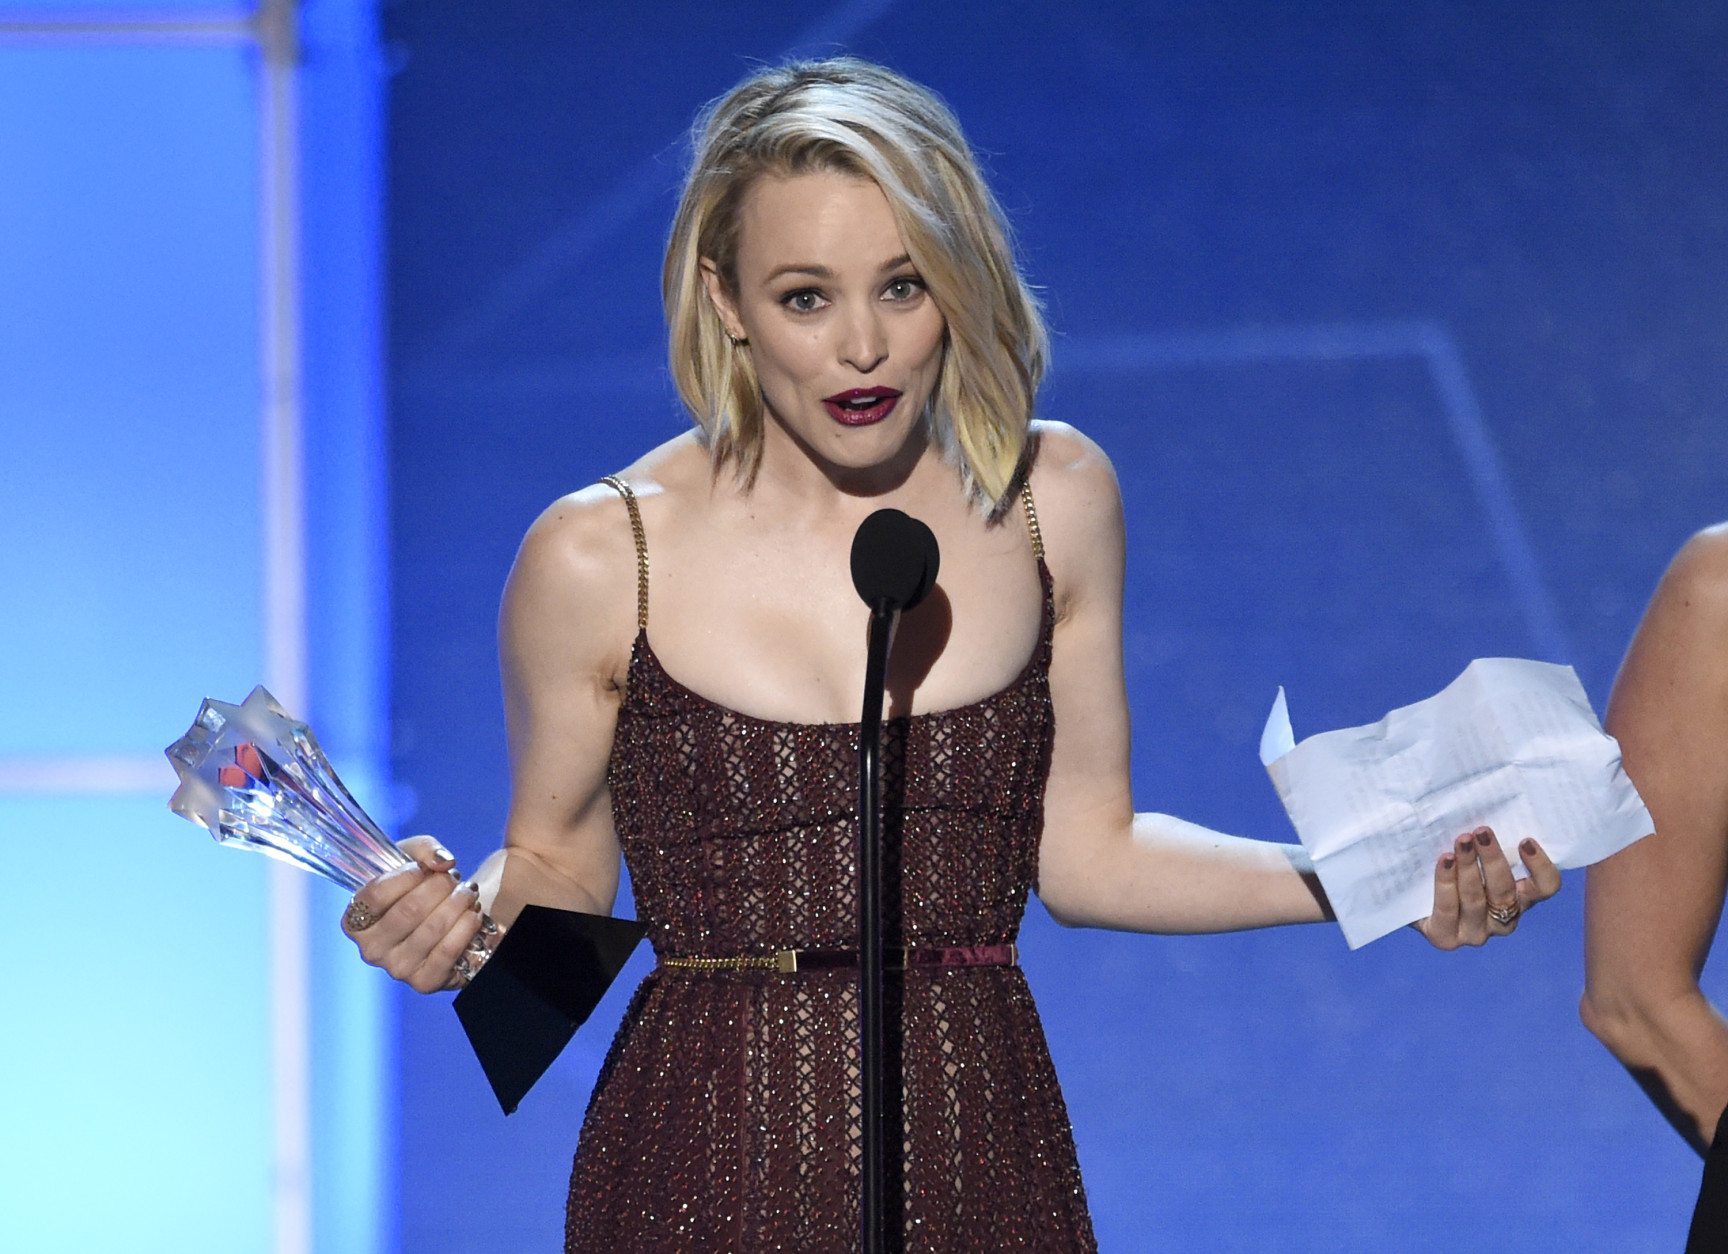 Rachel McAdams accepts the award for best acting ensemble for Spotlight at the 21st annual Critics' Choice Awards at the Barker Hangar on Sunday, Jan. 17, 2016, in Santa Monica, Calif. (Photo by Chris Pizzello/Invision/AP)